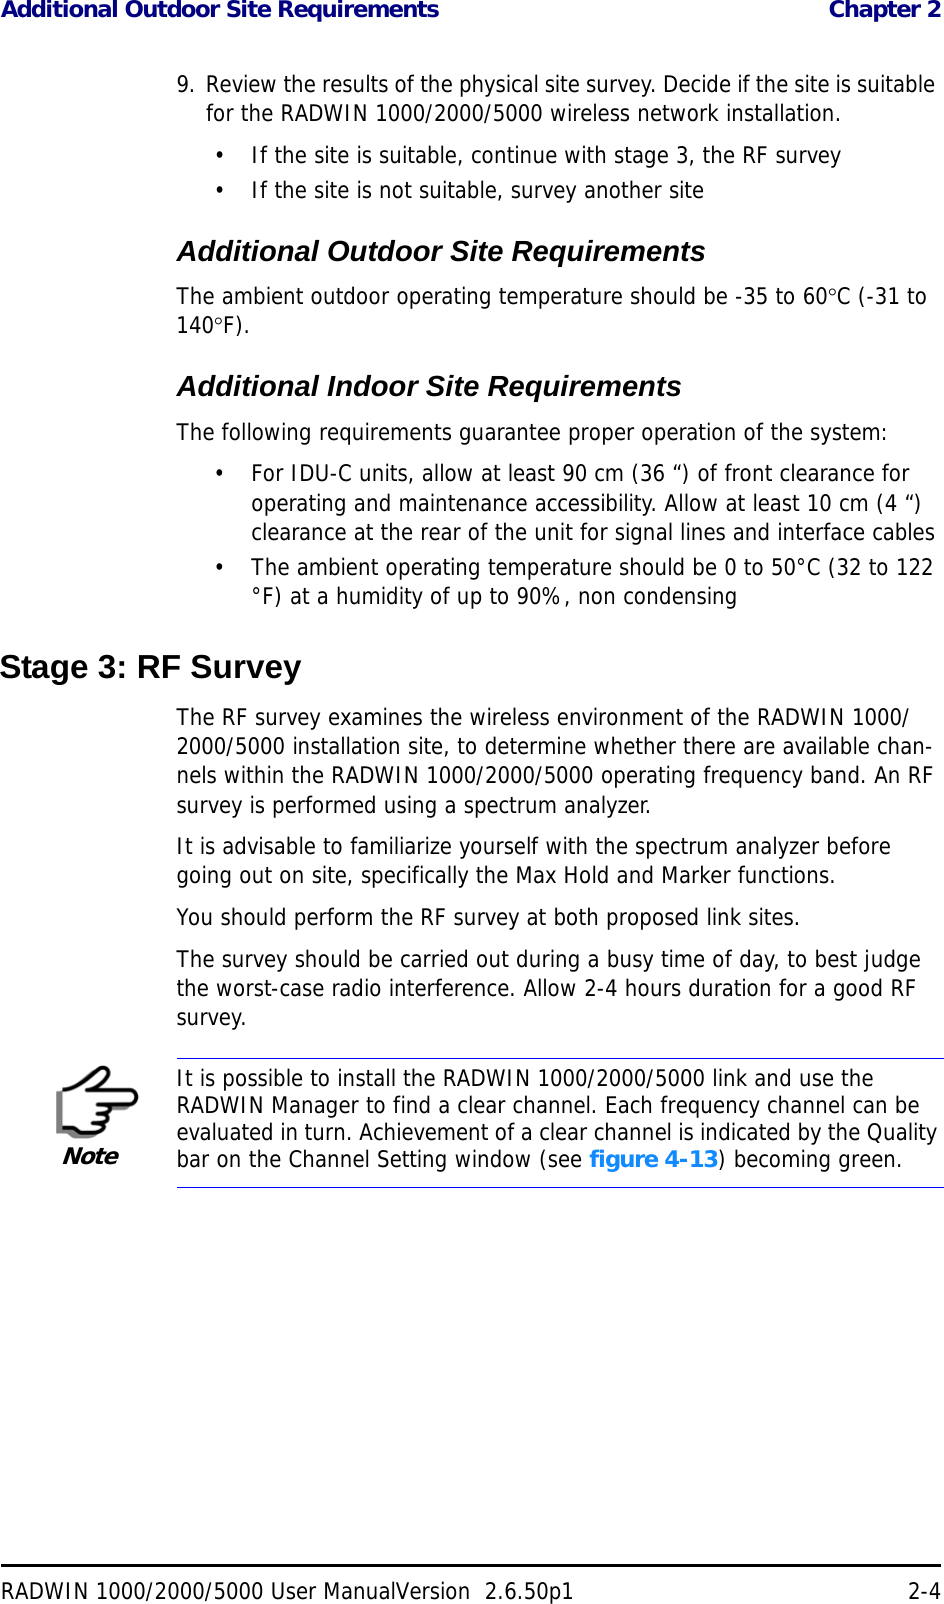 Additional Outdoor Site Requirements  Chapter 2RADWIN 1000/2000/5000 User ManualVersion  2.6.50p1 2-49. Review the results of the physical site survey. Decide if the site is suitable for the RADWIN 1000/2000/5000 wireless network installation.• If the site is suitable, continue with stage 3, the RF survey• If the site is not suitable, survey another siteAdditional Outdoor Site RequirementsThe ambient outdoor operating temperature should be -35 to 60C (-31 to 140F).Additional Indoor Site RequirementsThe following requirements guarantee proper operation of the system:• For IDU-C units, allow at least 90 cm (36 “) of front clearance for operating and maintenance accessibility. Allow at least 10 cm (4 “) clearance at the rear of the unit for signal lines and interface cables• The ambient operating temperature should be 0 to 50°C (32 to 122 °F) at a humidity of up to 90%, non condensingStage 3: RF SurveyThe RF survey examines the wireless environment of the RADWIN 1000/2000/5000 installation site, to determine whether there are available chan-nels within the RADWIN 1000/2000/5000 operating frequency band. An RF survey is performed using a spectrum analyzer.It is advisable to familiarize yourself with the spectrum analyzer before going out on site, specifically the Max Hold and Marker functions.You should perform the RF survey at both proposed link sites.The survey should be carried out during a busy time of day, to best judge the worst-case radio interference. Allow 2-4 hours duration for a good RF survey.NoteIt is possible to install the RADWIN 1000/2000/5000 link and use the RADWIN Manager to find a clear channel. Each frequency channel can be evaluated in turn. Achievement of a clear channel is indicated by the Quality bar on the Channel Setting window (see figure 4-13) becoming green.